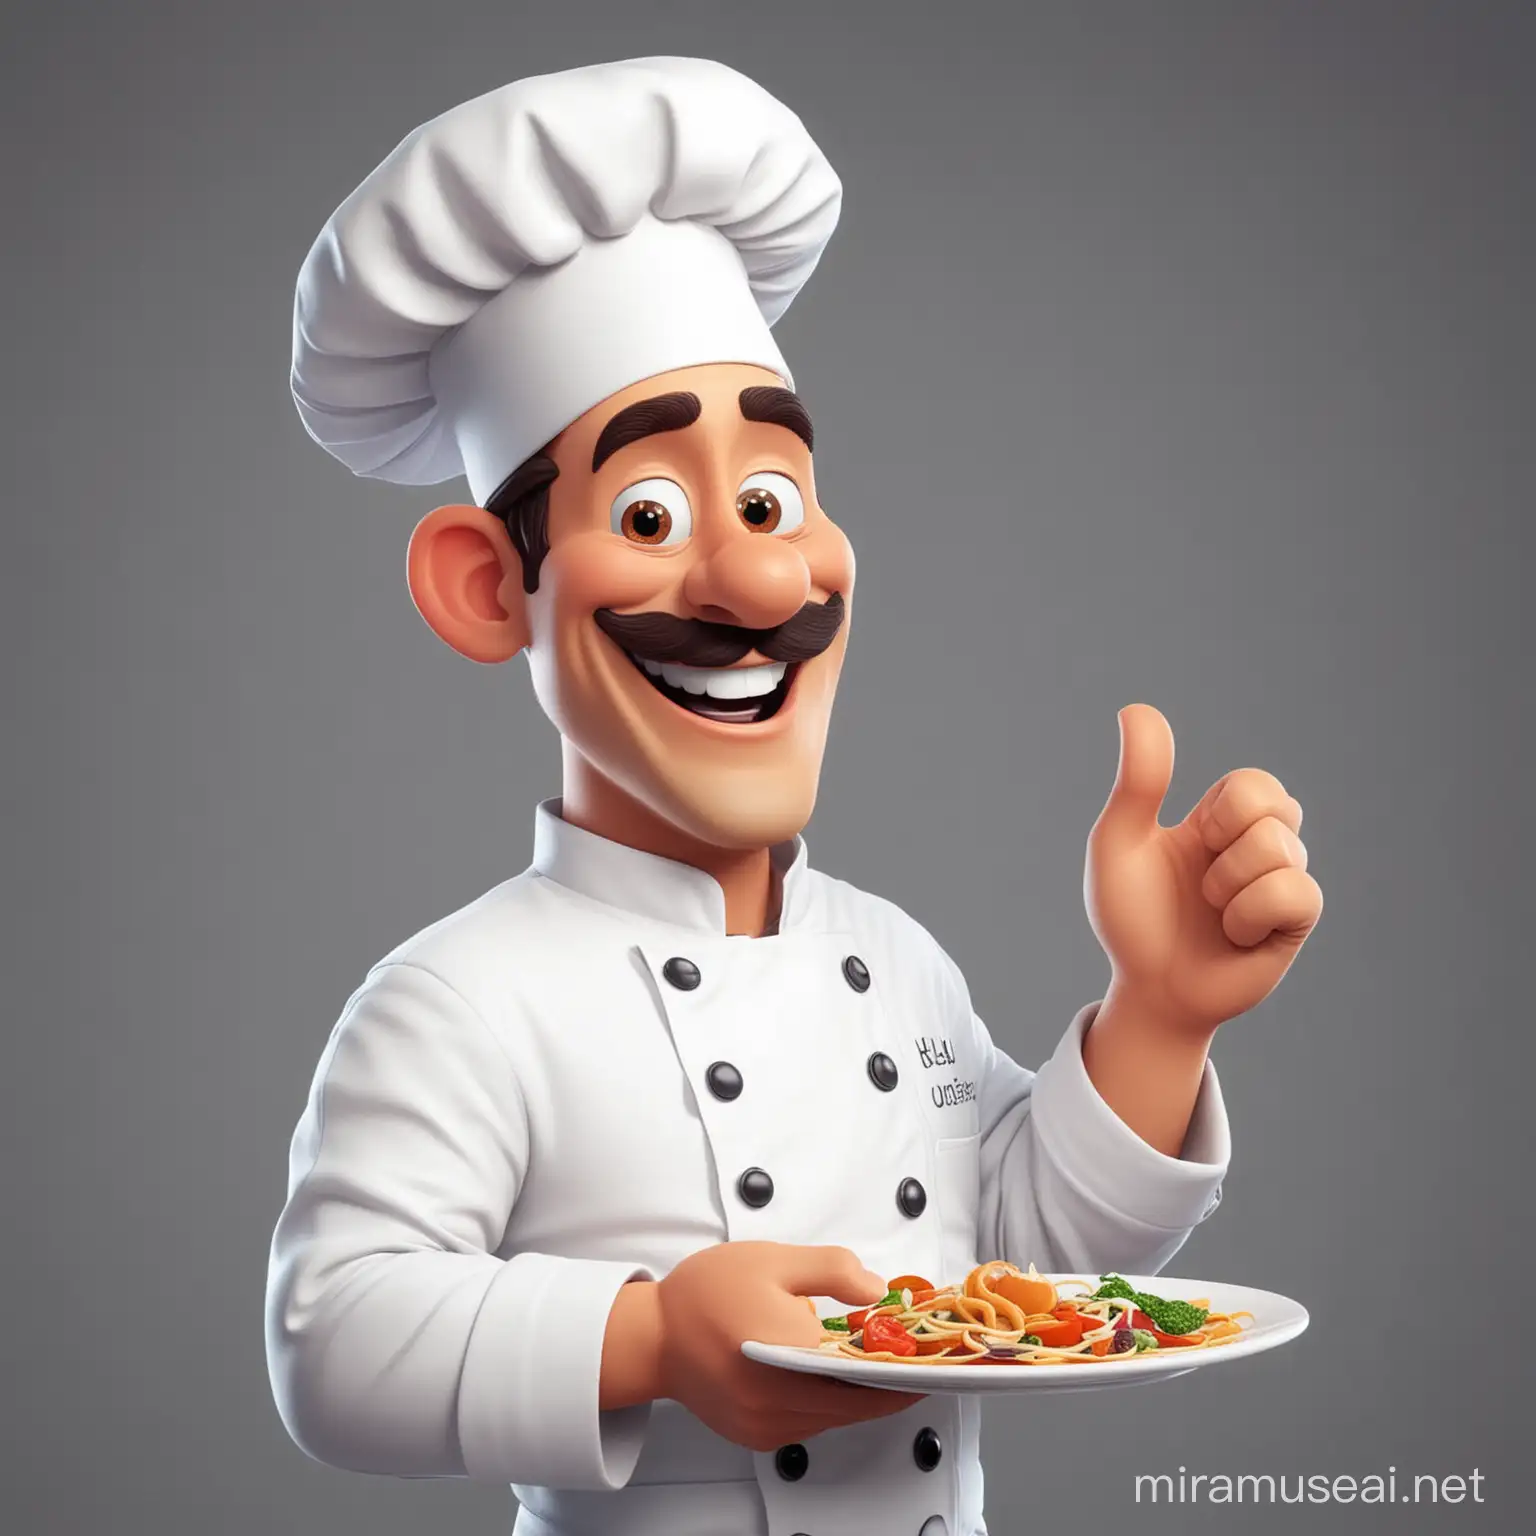 4k Hd logo photo of an animated cartoon chef holding a plate in his hand while smiling